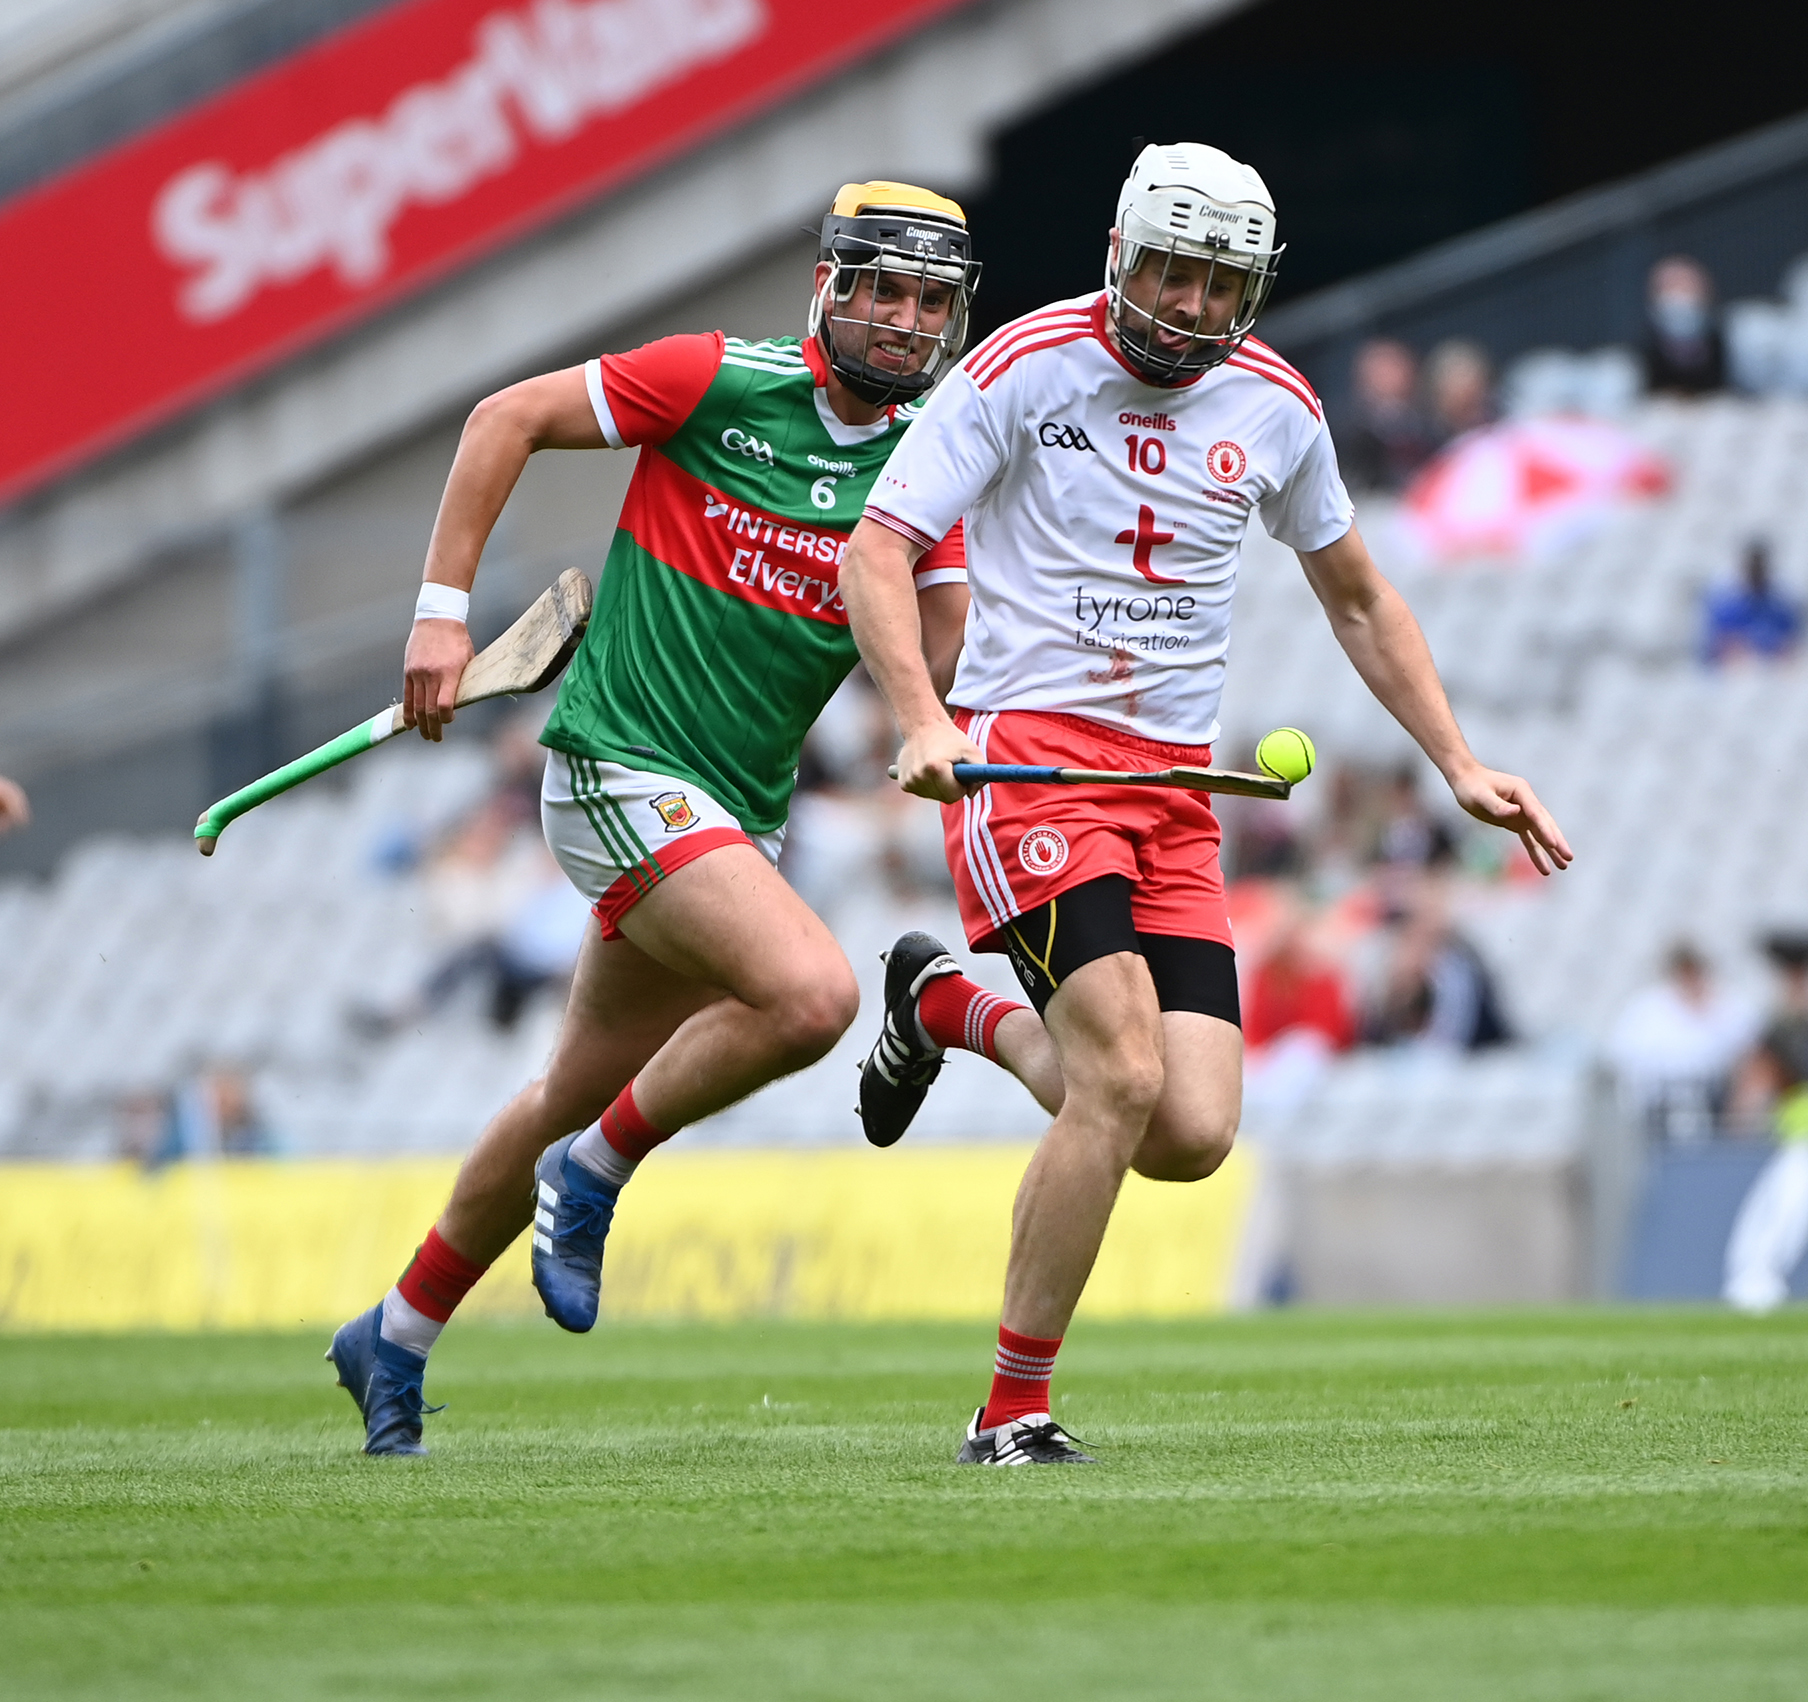 Grogan geared up for hurlers Royal engagement